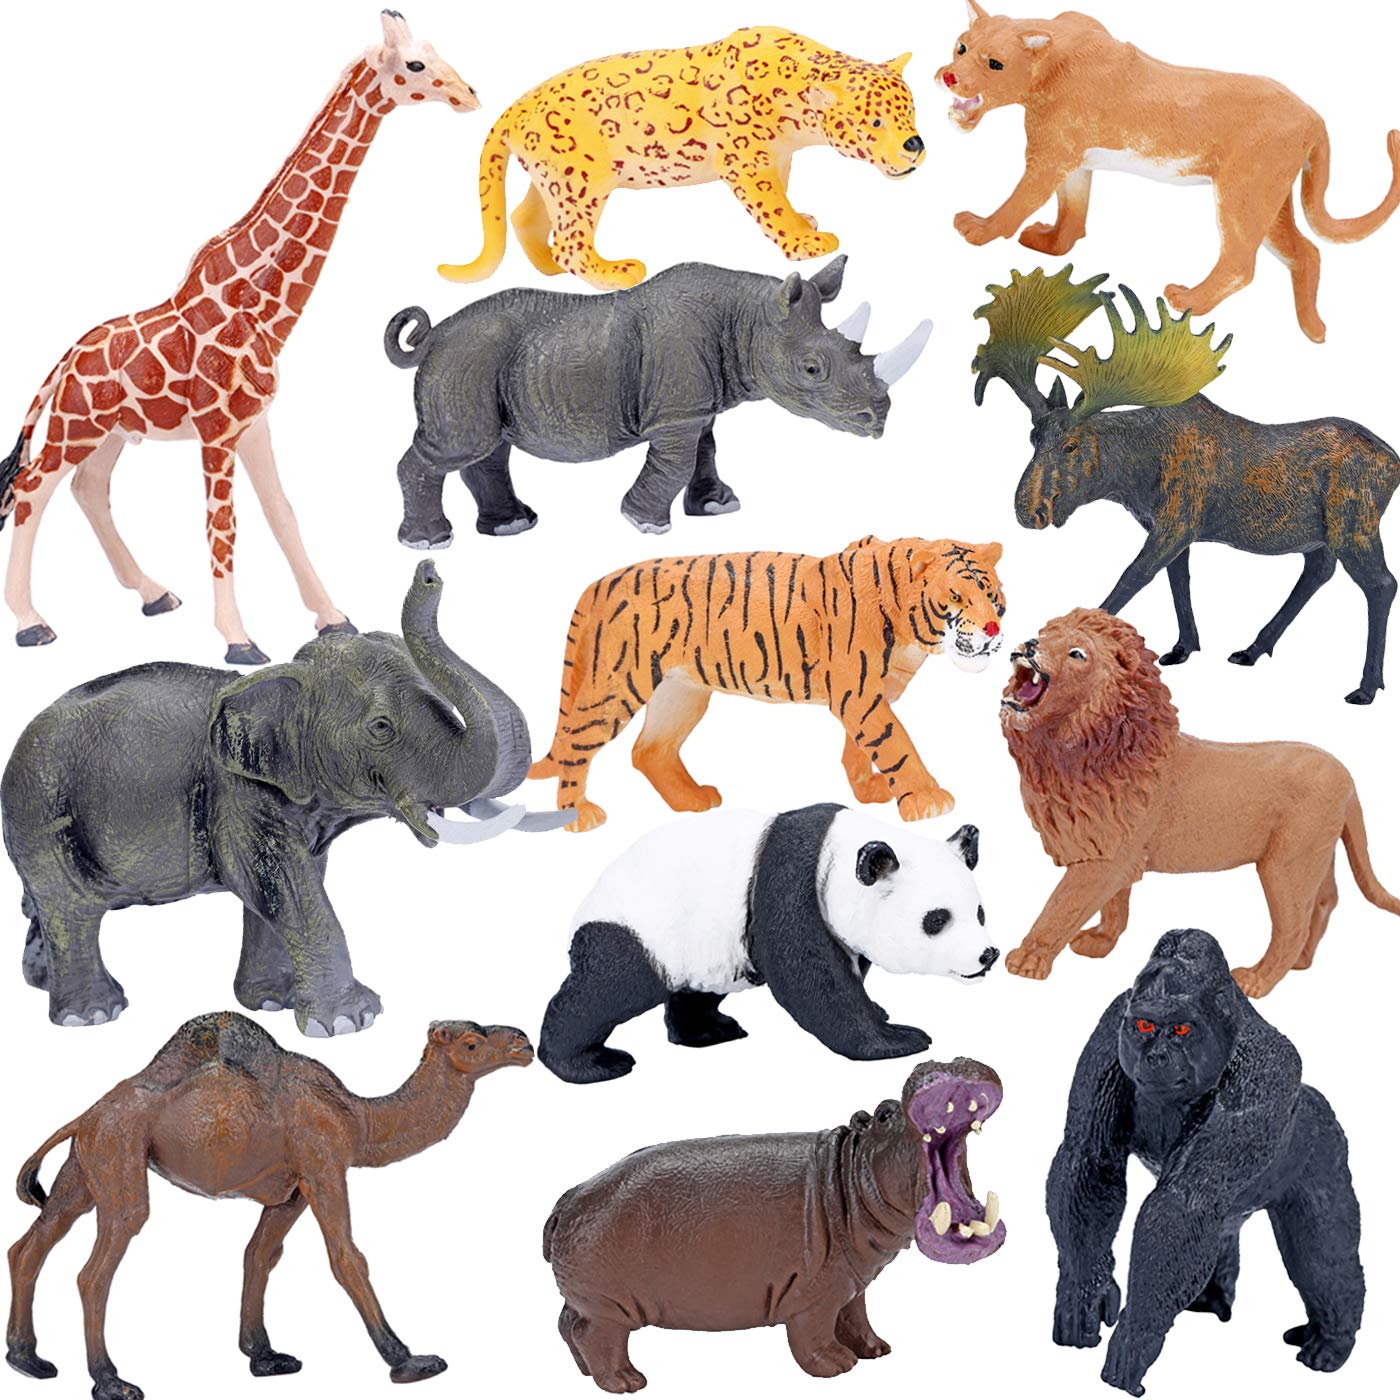 Safari Animals Figures Toys, Realistic Jumbo Wild Zoo Animals Figurines Large Plastic African Jungle Animals Playset with Elephant, Giraffe, Lion, Tiger, Gorilla for Kids Toddlers, 12 Piece Gift Set